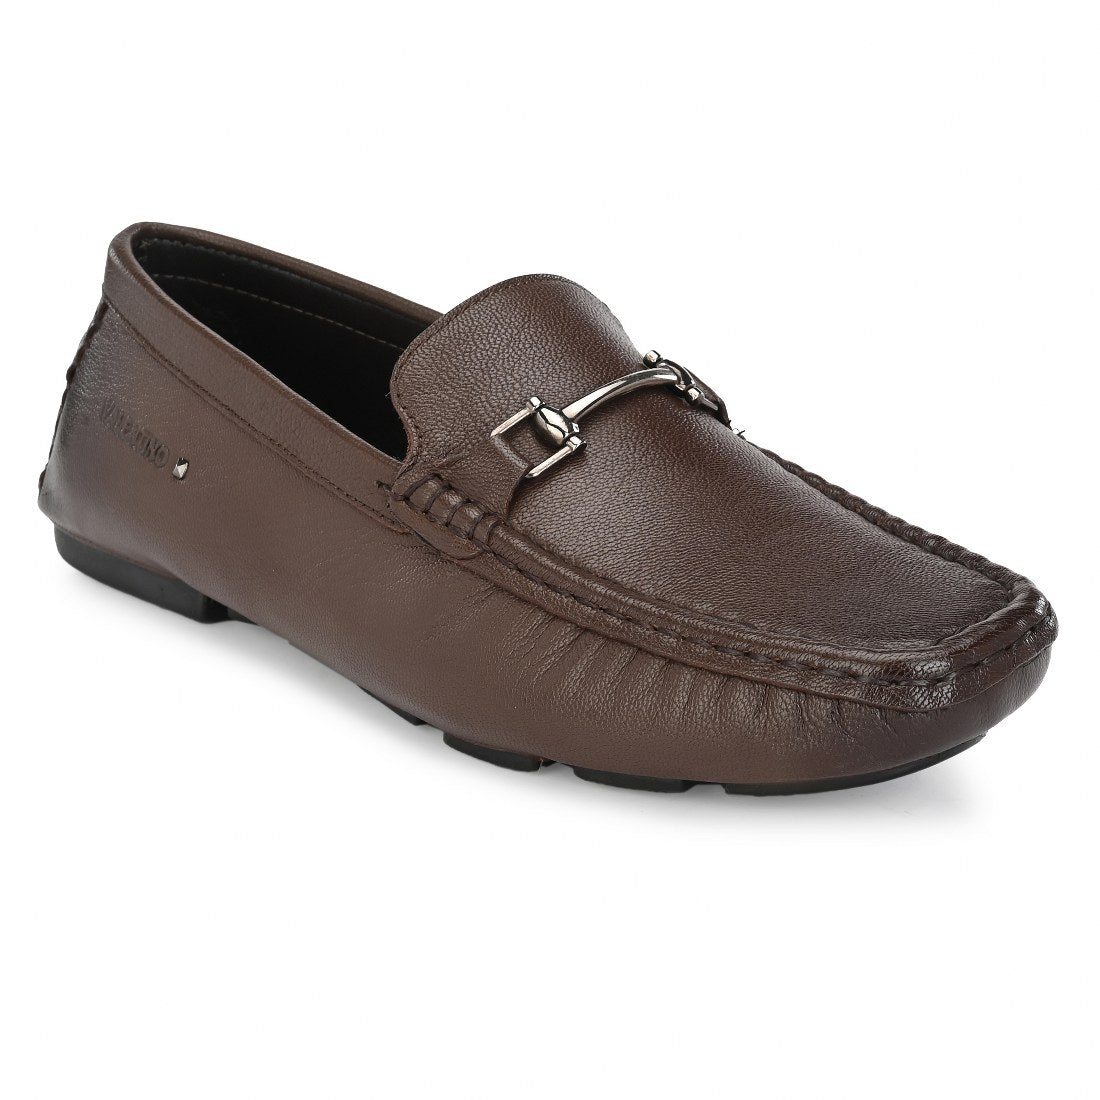 EMPORIO-27 MEN LEATHER BROWN-MOCCA CASUAL SLIP ON DRIVING